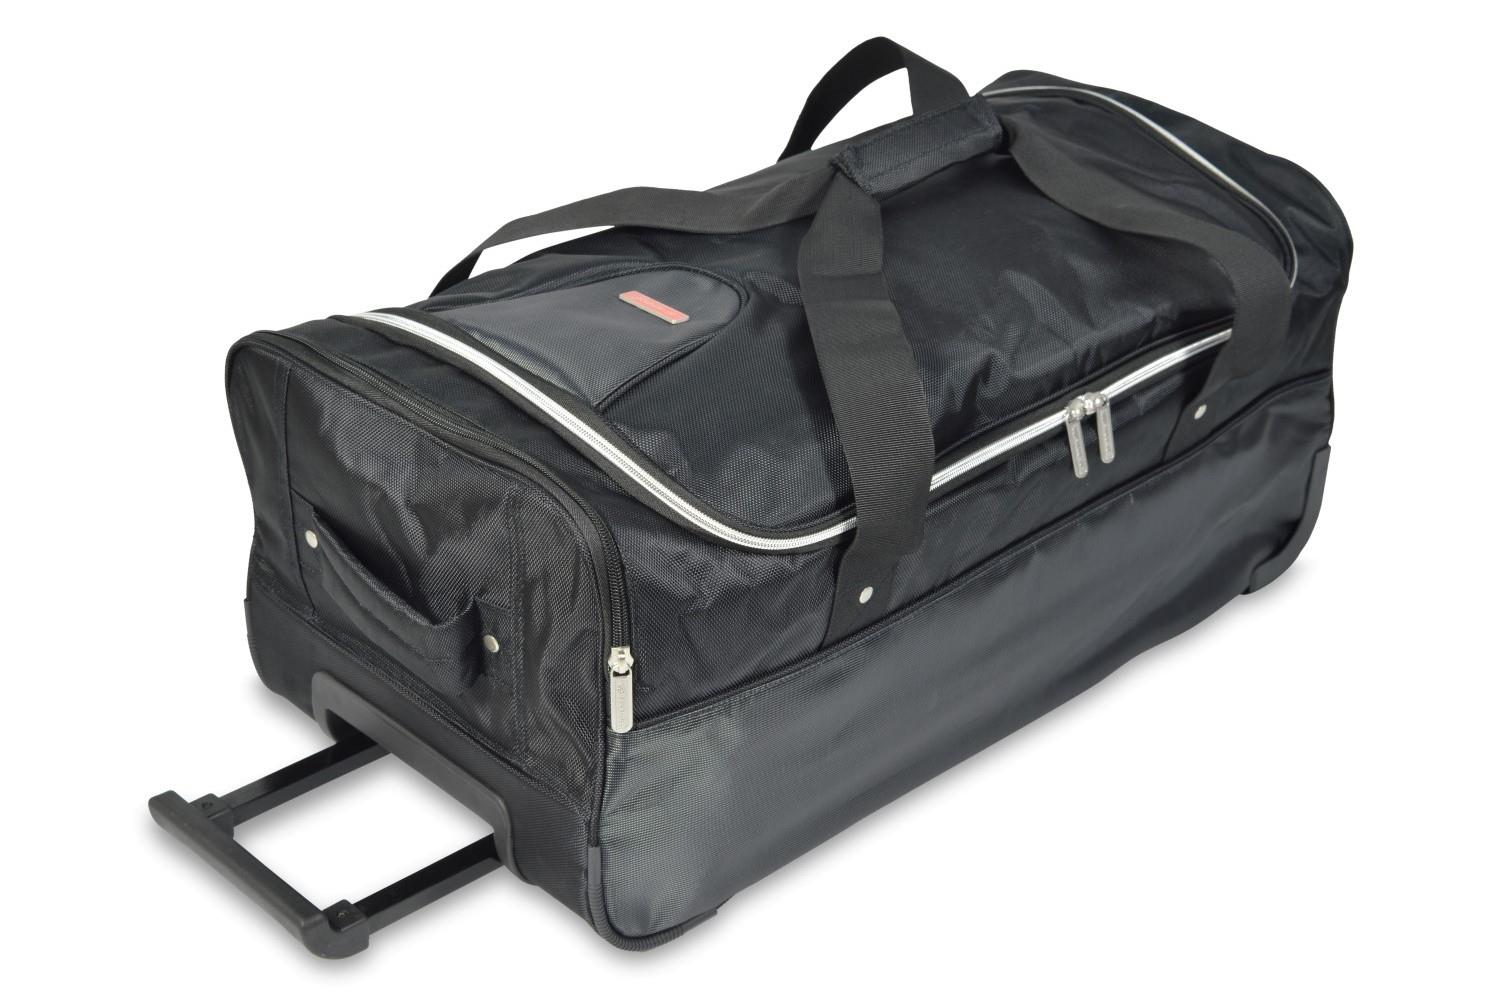 Carbags Travel bag set suitable for Peugeot 307 2001-2008 #P10201S